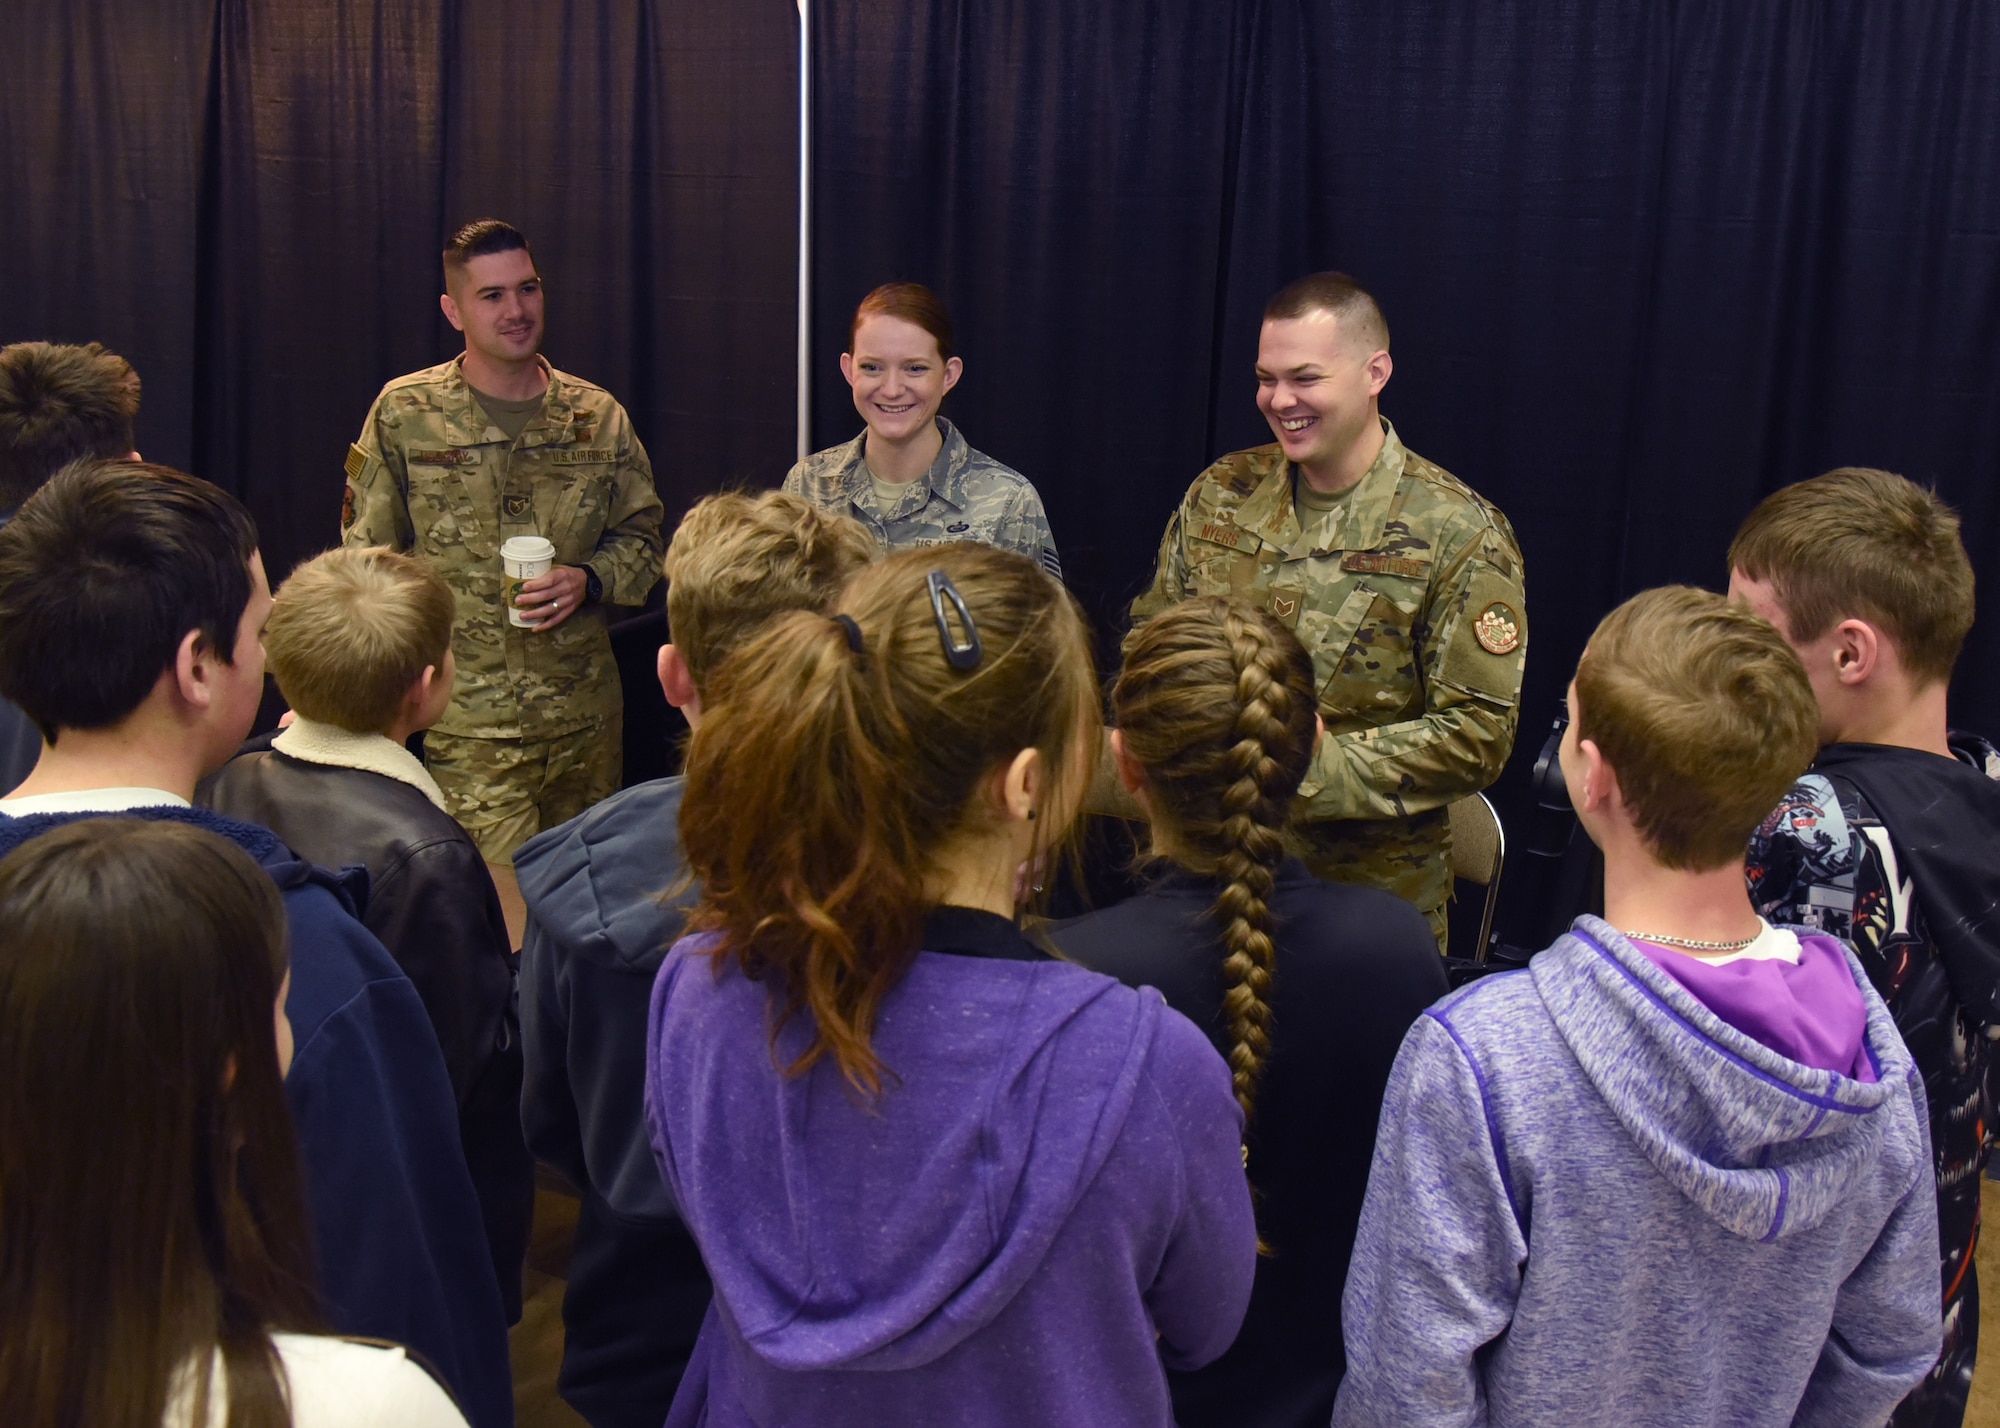 U.S. Air Force members answer questions from students of the Water Valley Independent School District at the youth career fair, Careers Y’all, at the McNease Convention Center, in San Angelo, Texas, March 6, 2019. The military members volunteered their time to showcase their career fields and mentor youth. (U.S. Air Force photo by Airman 1st Class Abbey Rieves/Released)